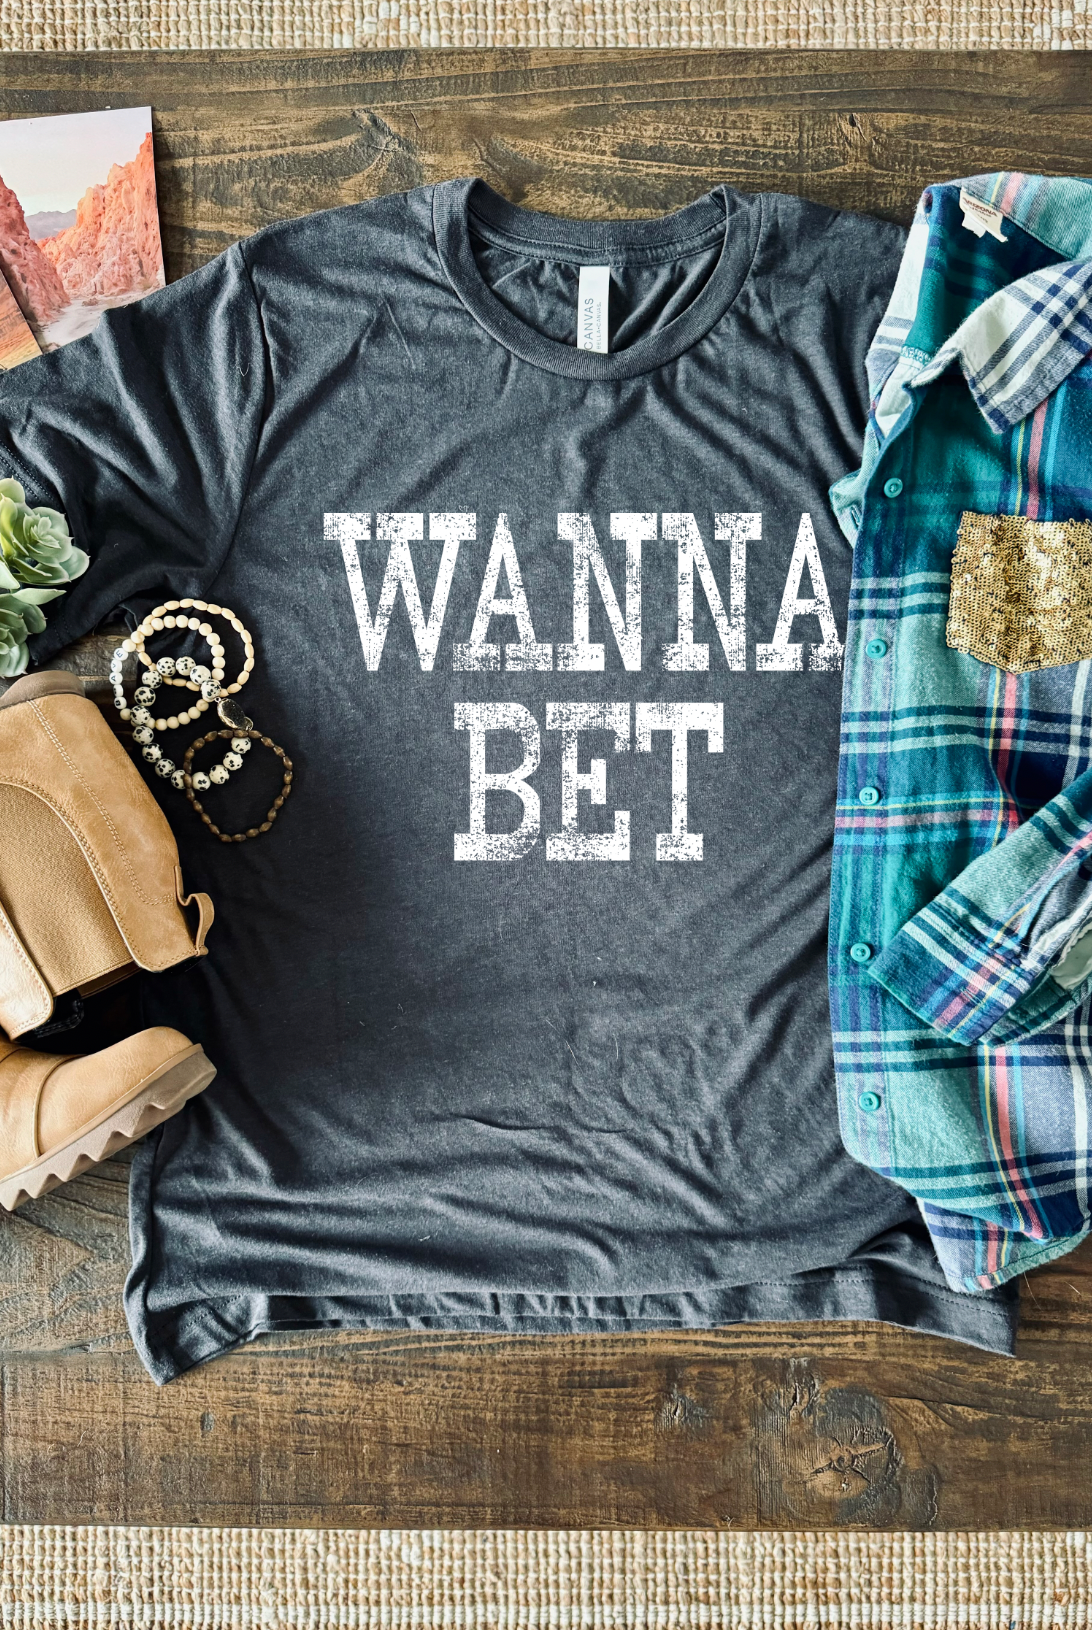 Wanna Bet, a sassy and fun country girl vintage tee on charcoal shirt.